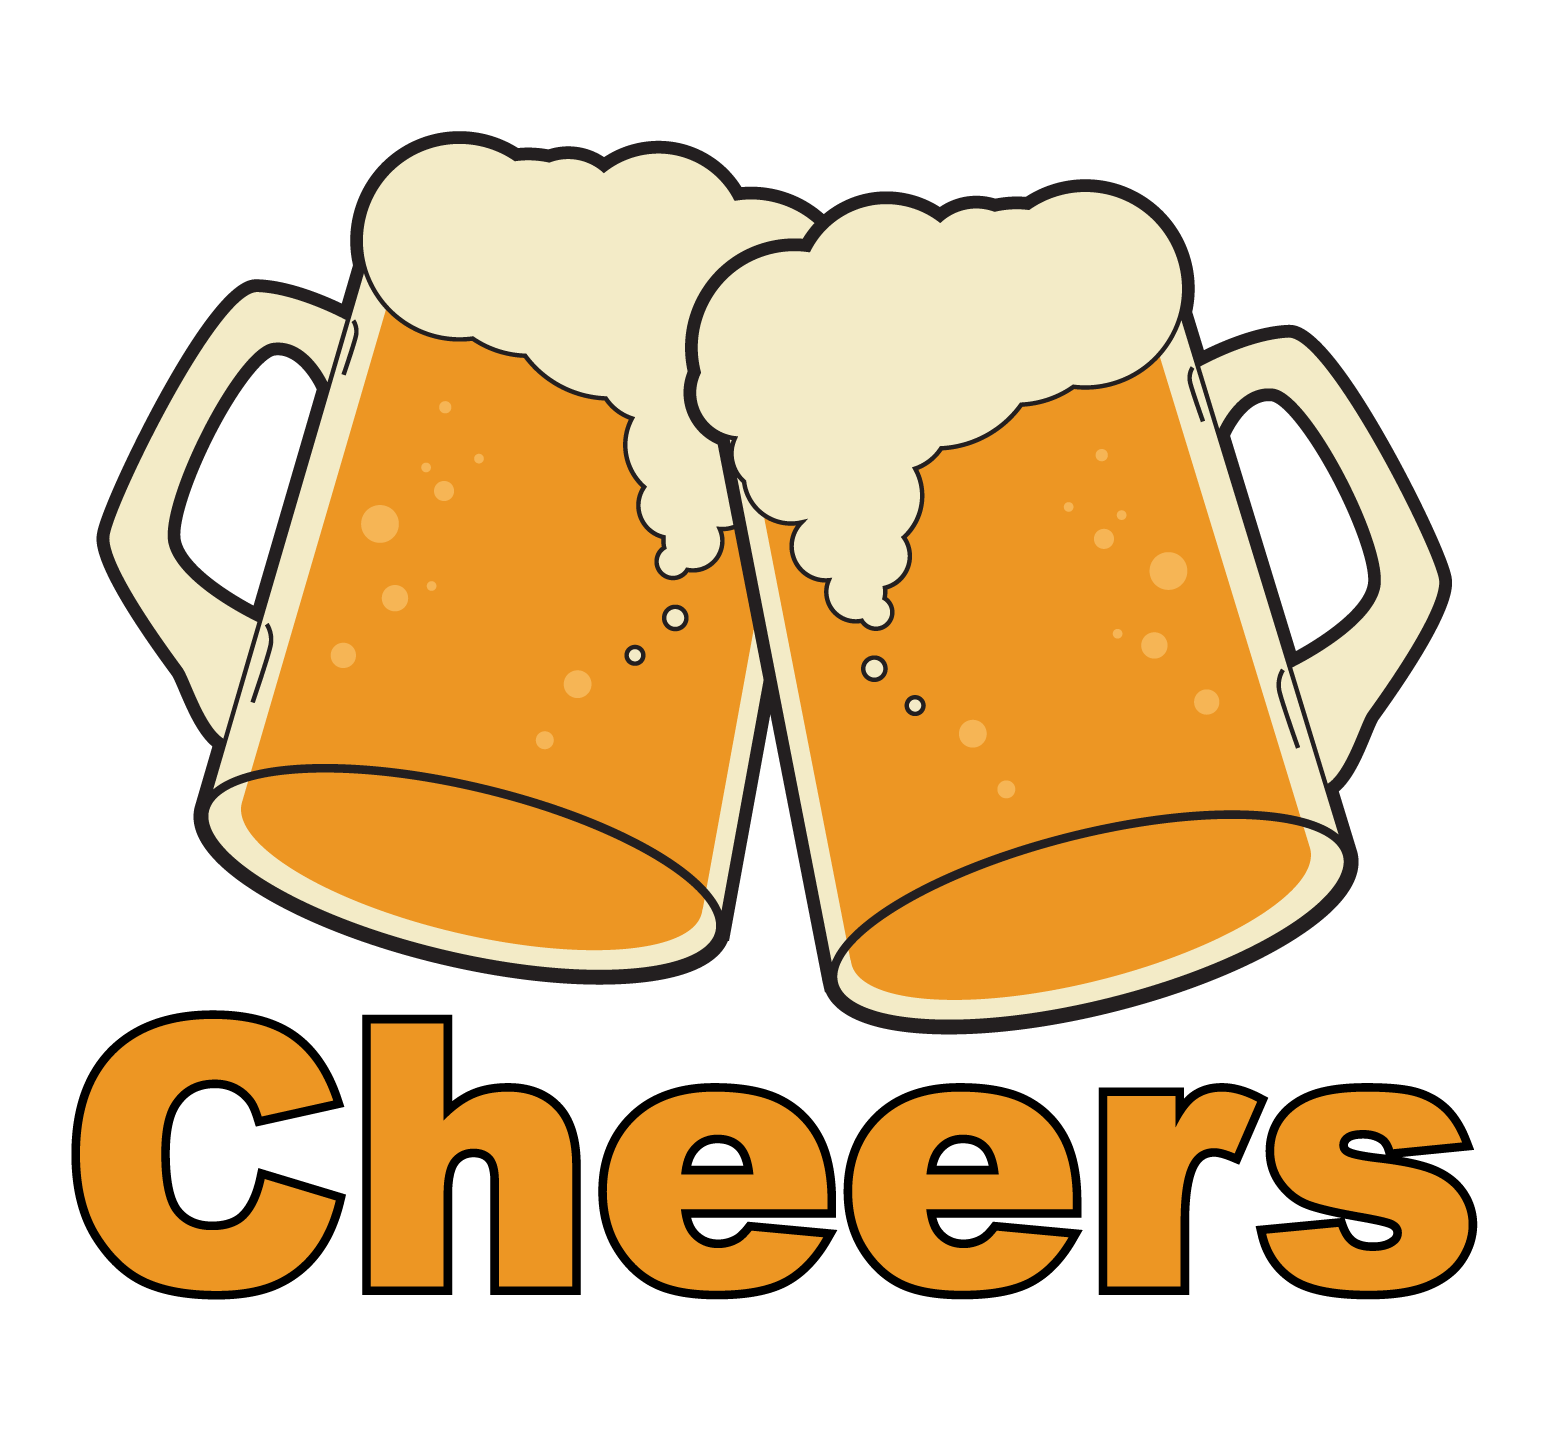 Beer Mugs Cheers Clipart Cliparts And Others Art Inspiration | The Best ...